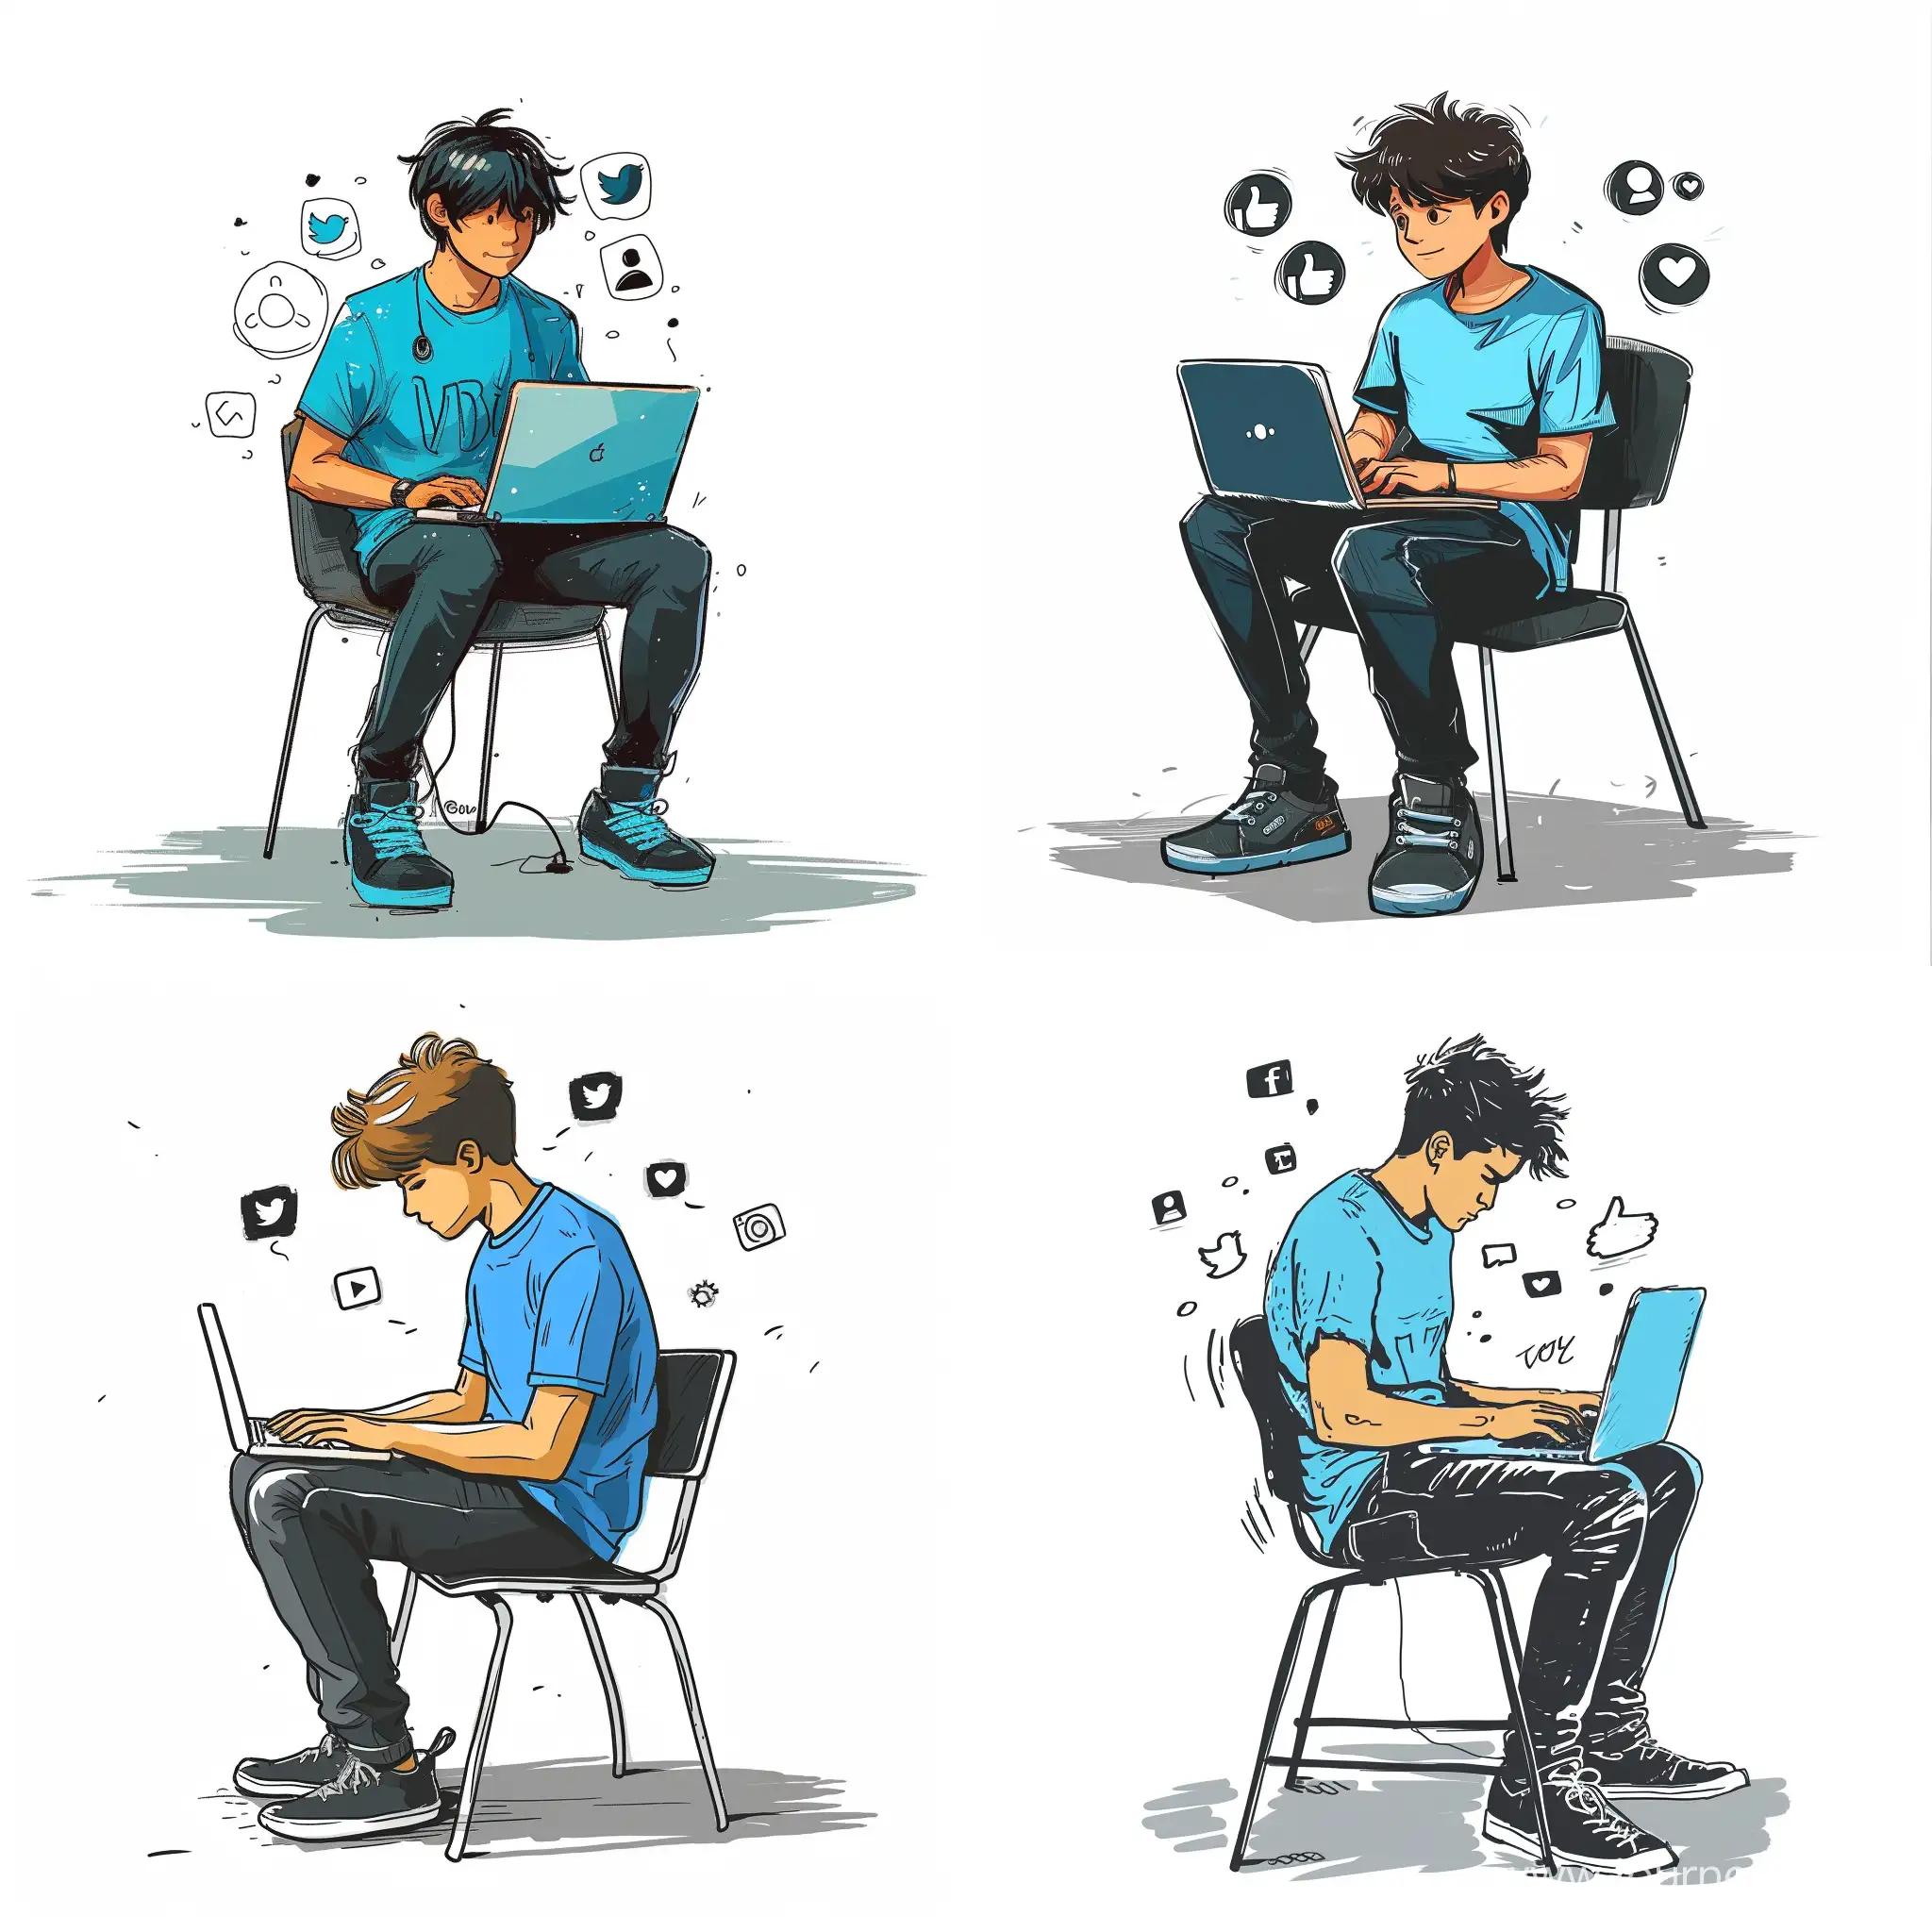 A young man wearing a blue T-shirt and black pants is sitting on a chair and in front of a laptop.  He appears to be a programmer,  and there are social media icons around. Victor sketch drawing illustrator style on white background. 